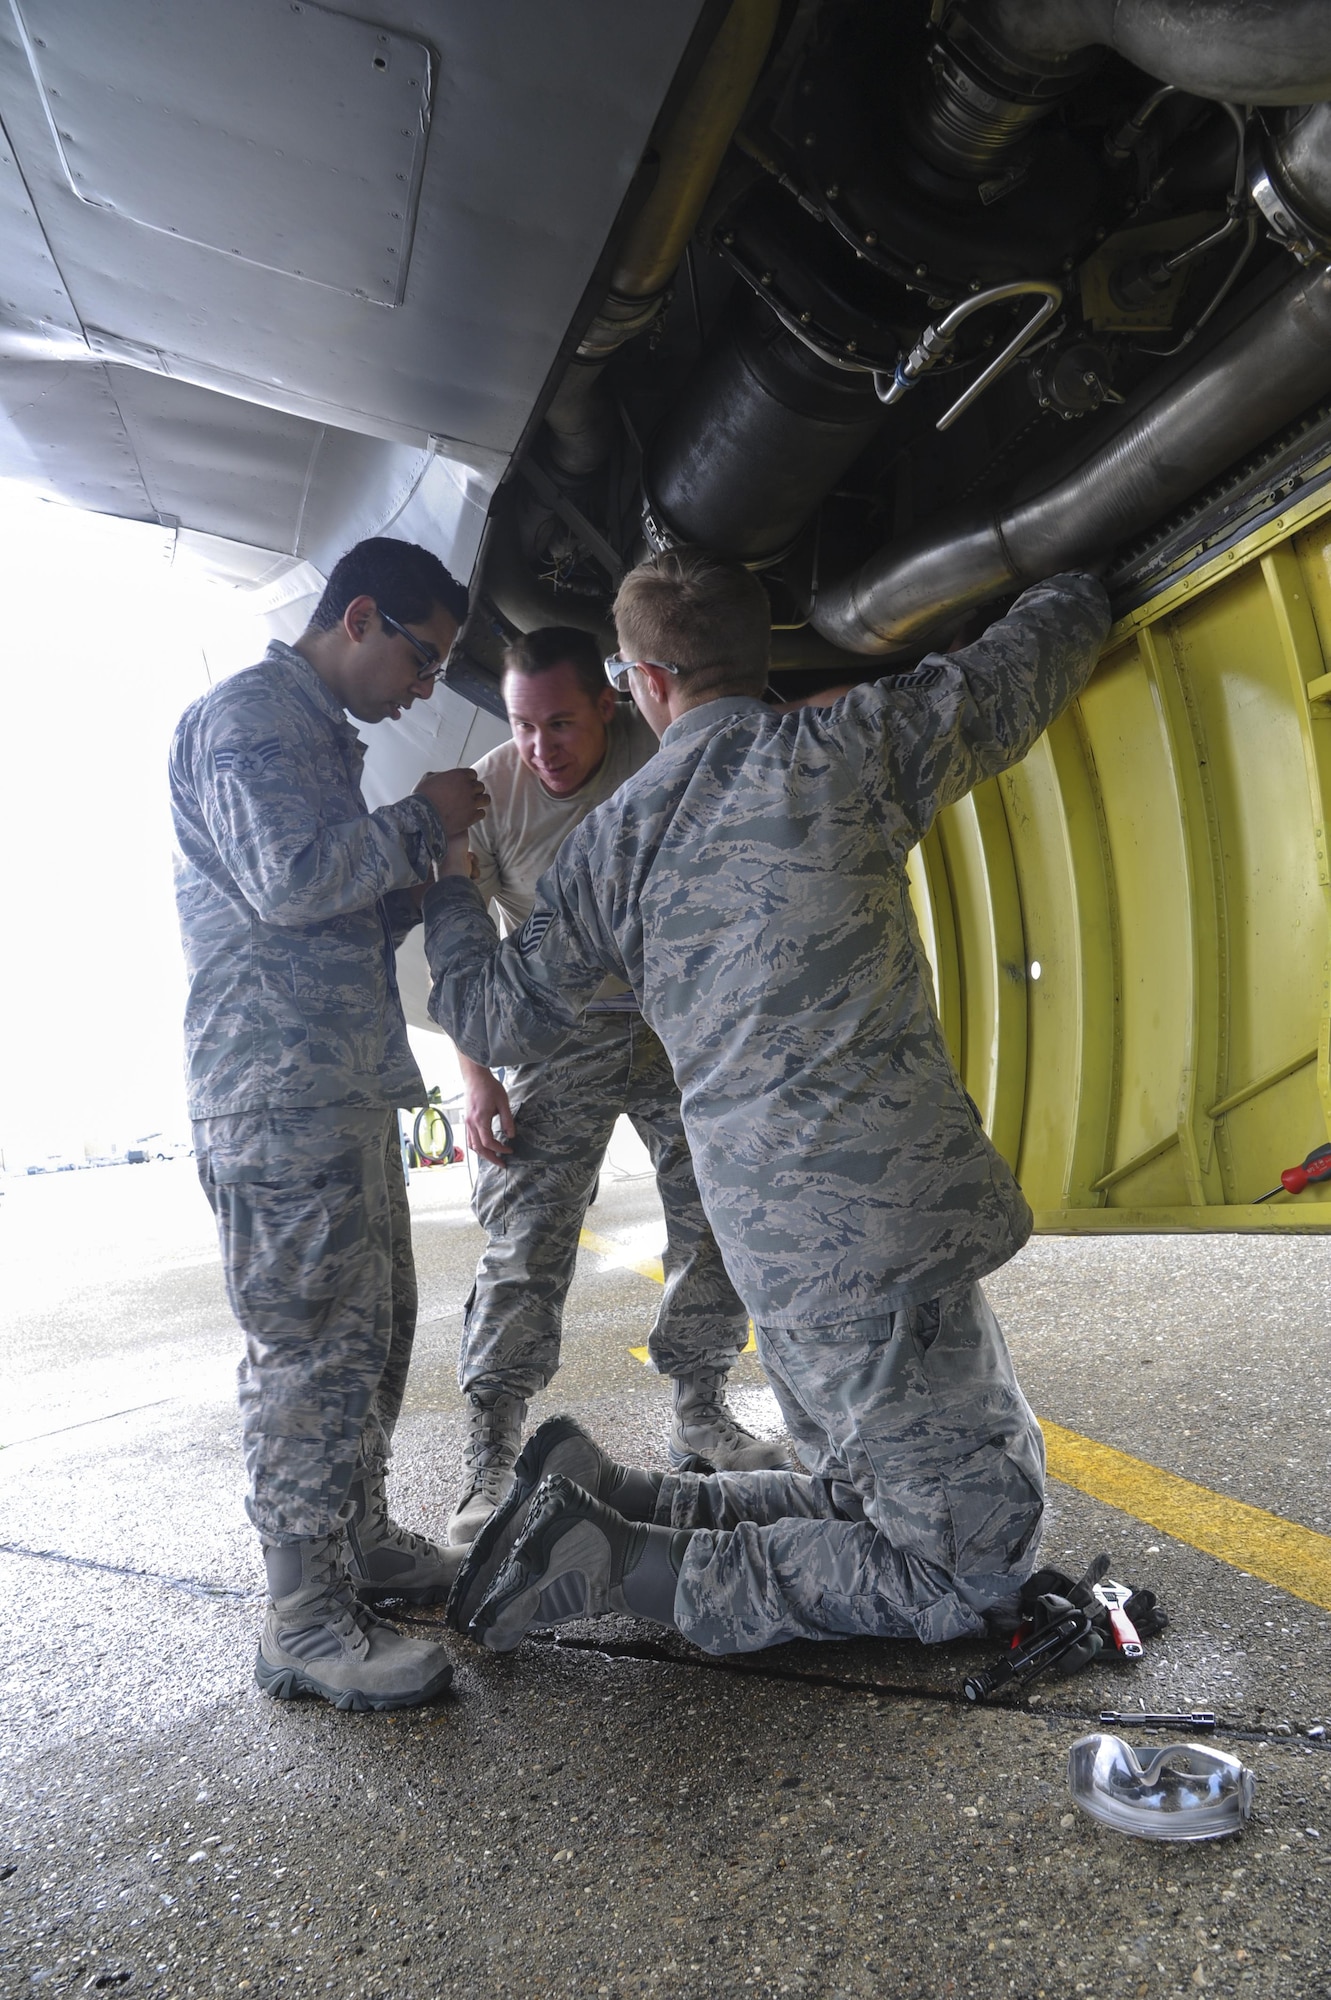 940th Aircraft Maintenance Squadron aircraft hydraulic technicians repair a hydraulic line on the KC-135 Stratotanker Feb. 10, 2017, at Beale Air Force Base, California. The Airmen practiced preparing four KC-135 Stratotankers for expedited takeoff. (U.S. Air Force photo by Senior Airman Tara R. Abrahams)